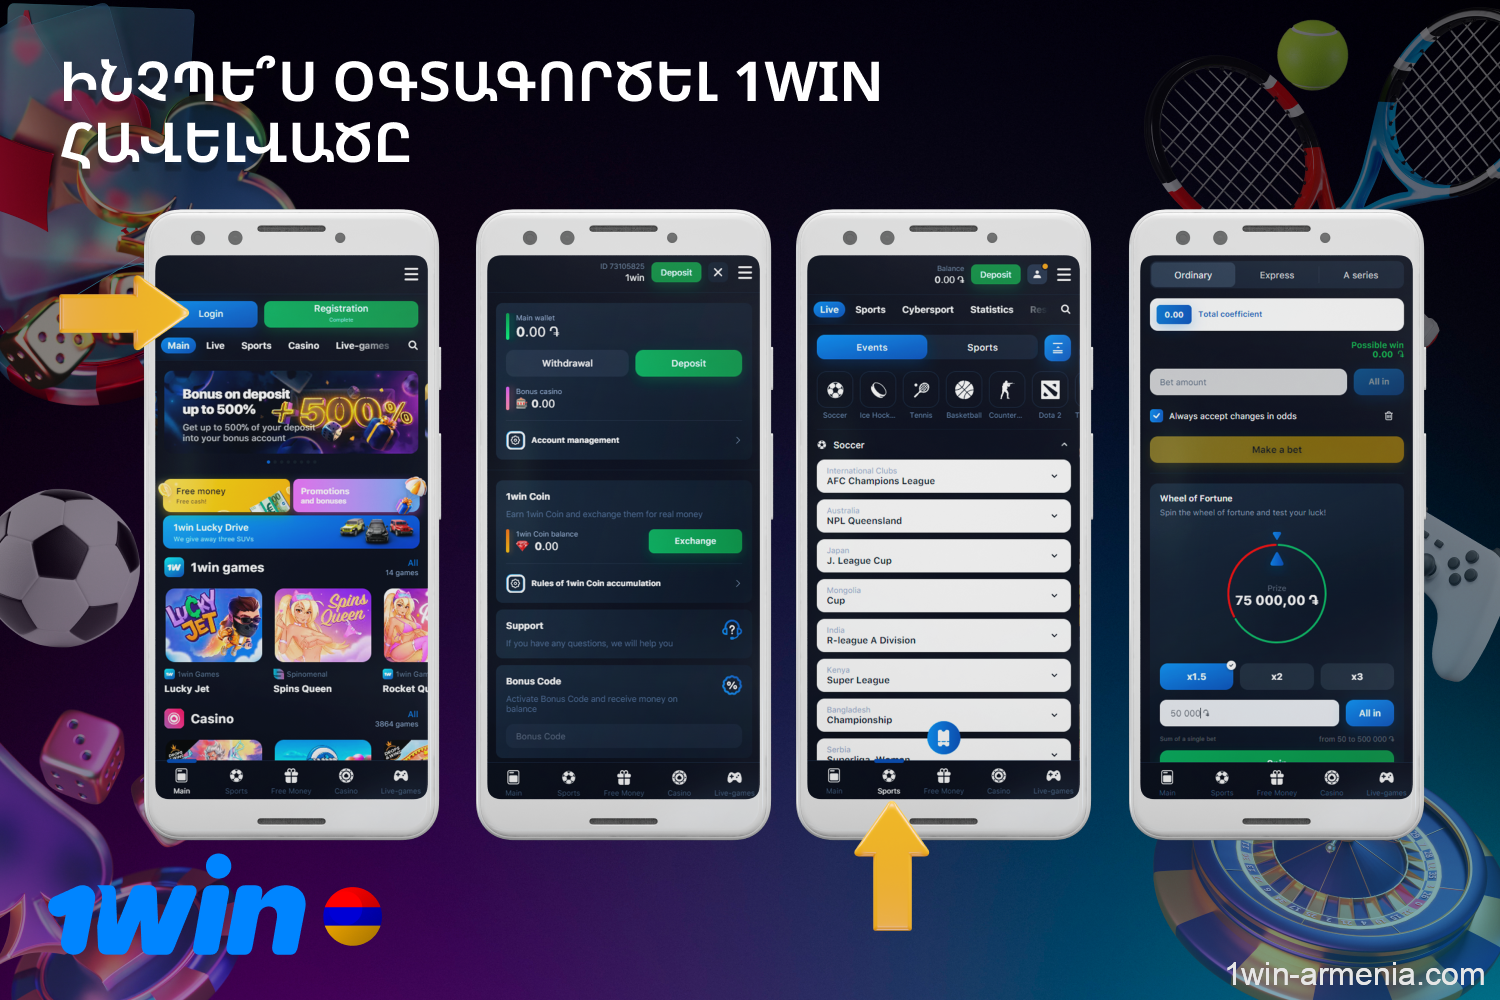 Armenian players can follow a simple guide to start betting through the 1win app for iOS and Android